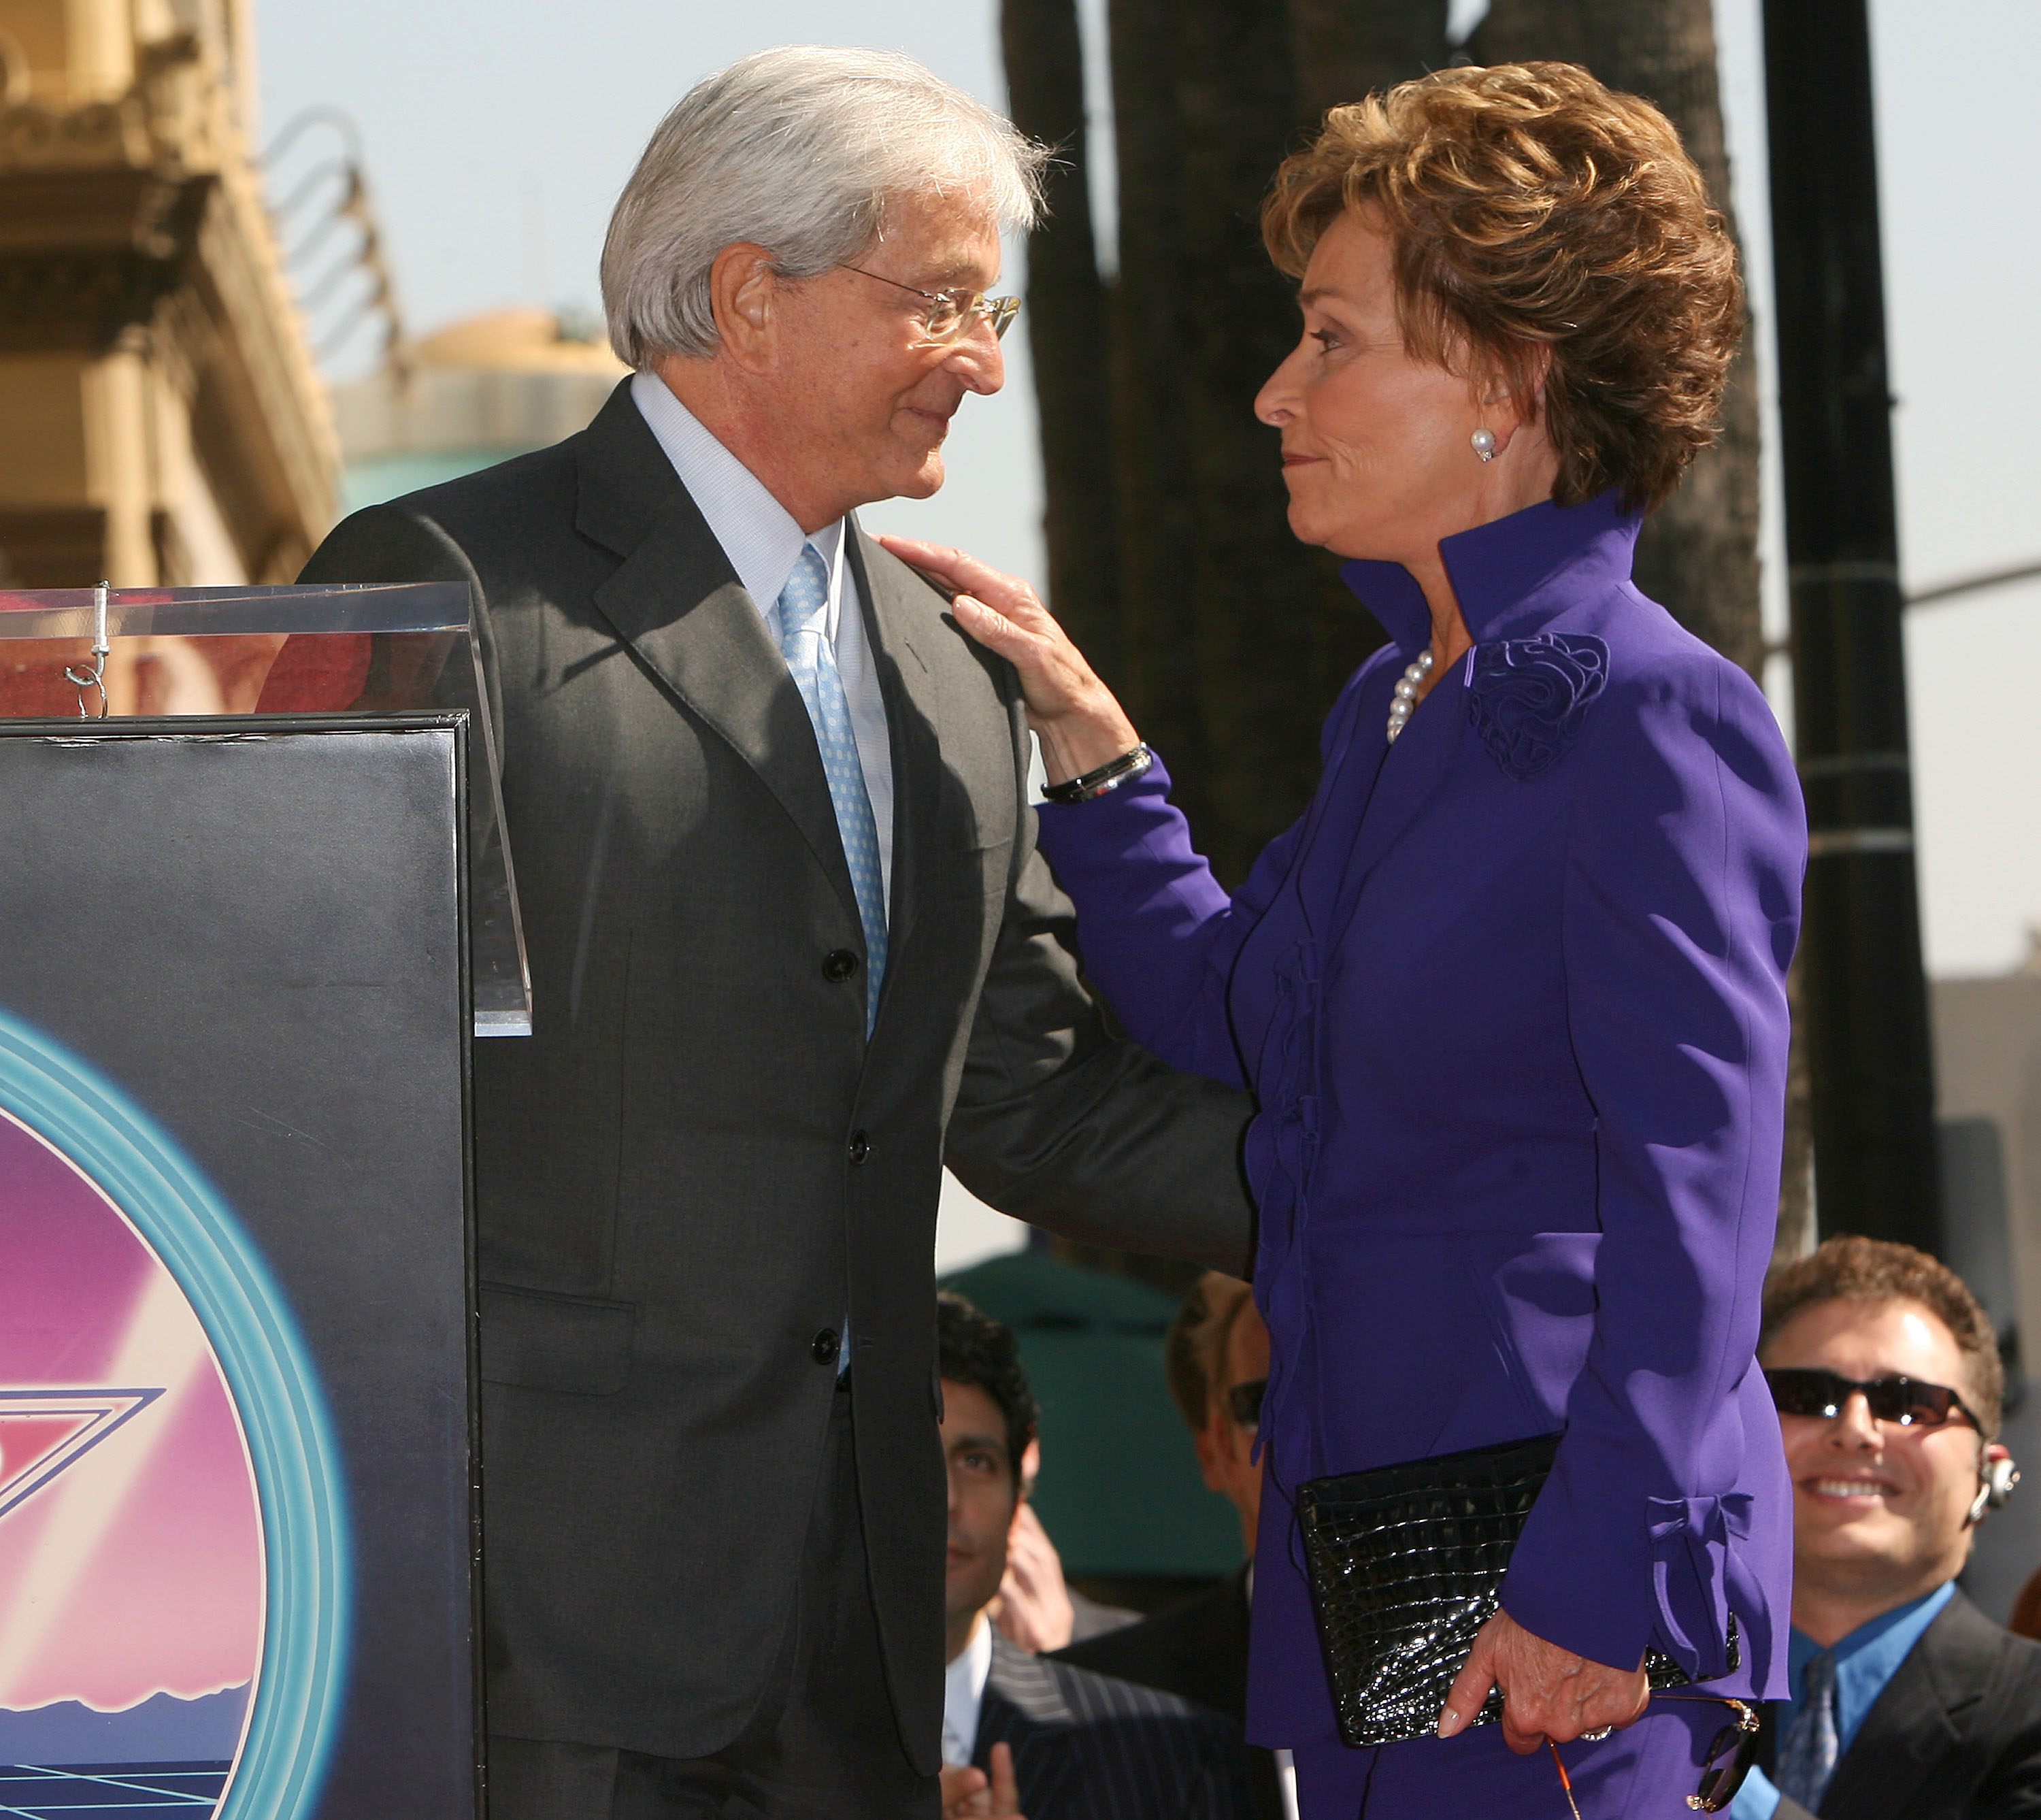 Judge Judy Sheindlin and Judge Jerry Sheindlin during Judge Judy Sheindlin Honored With a Star on the Hollywood Walk of Fame at 7065 Hollywood Boulevard on February 14, 2006 in Hollywood, California. | Source: Getty Images